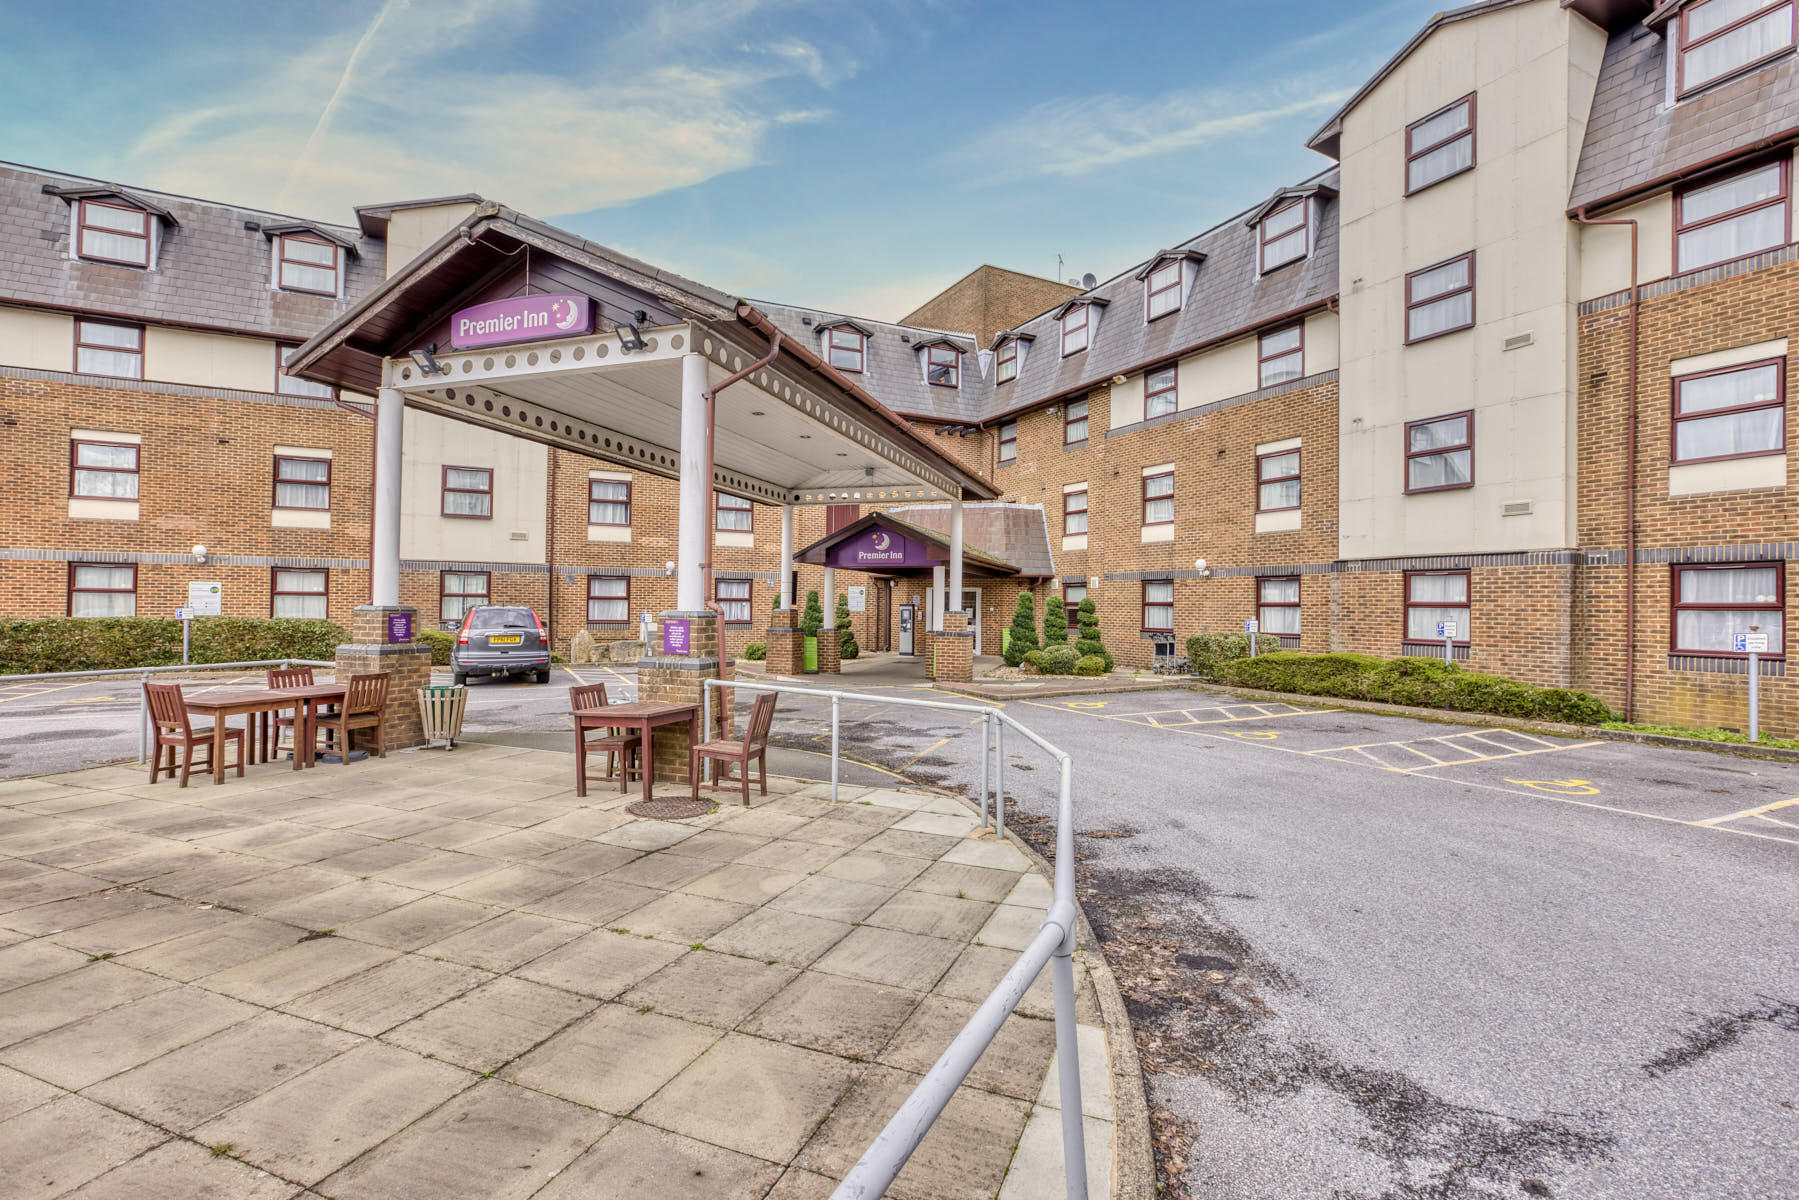 Images Premier Inn London Gatwick Airport (A23 Airport Way) hotel